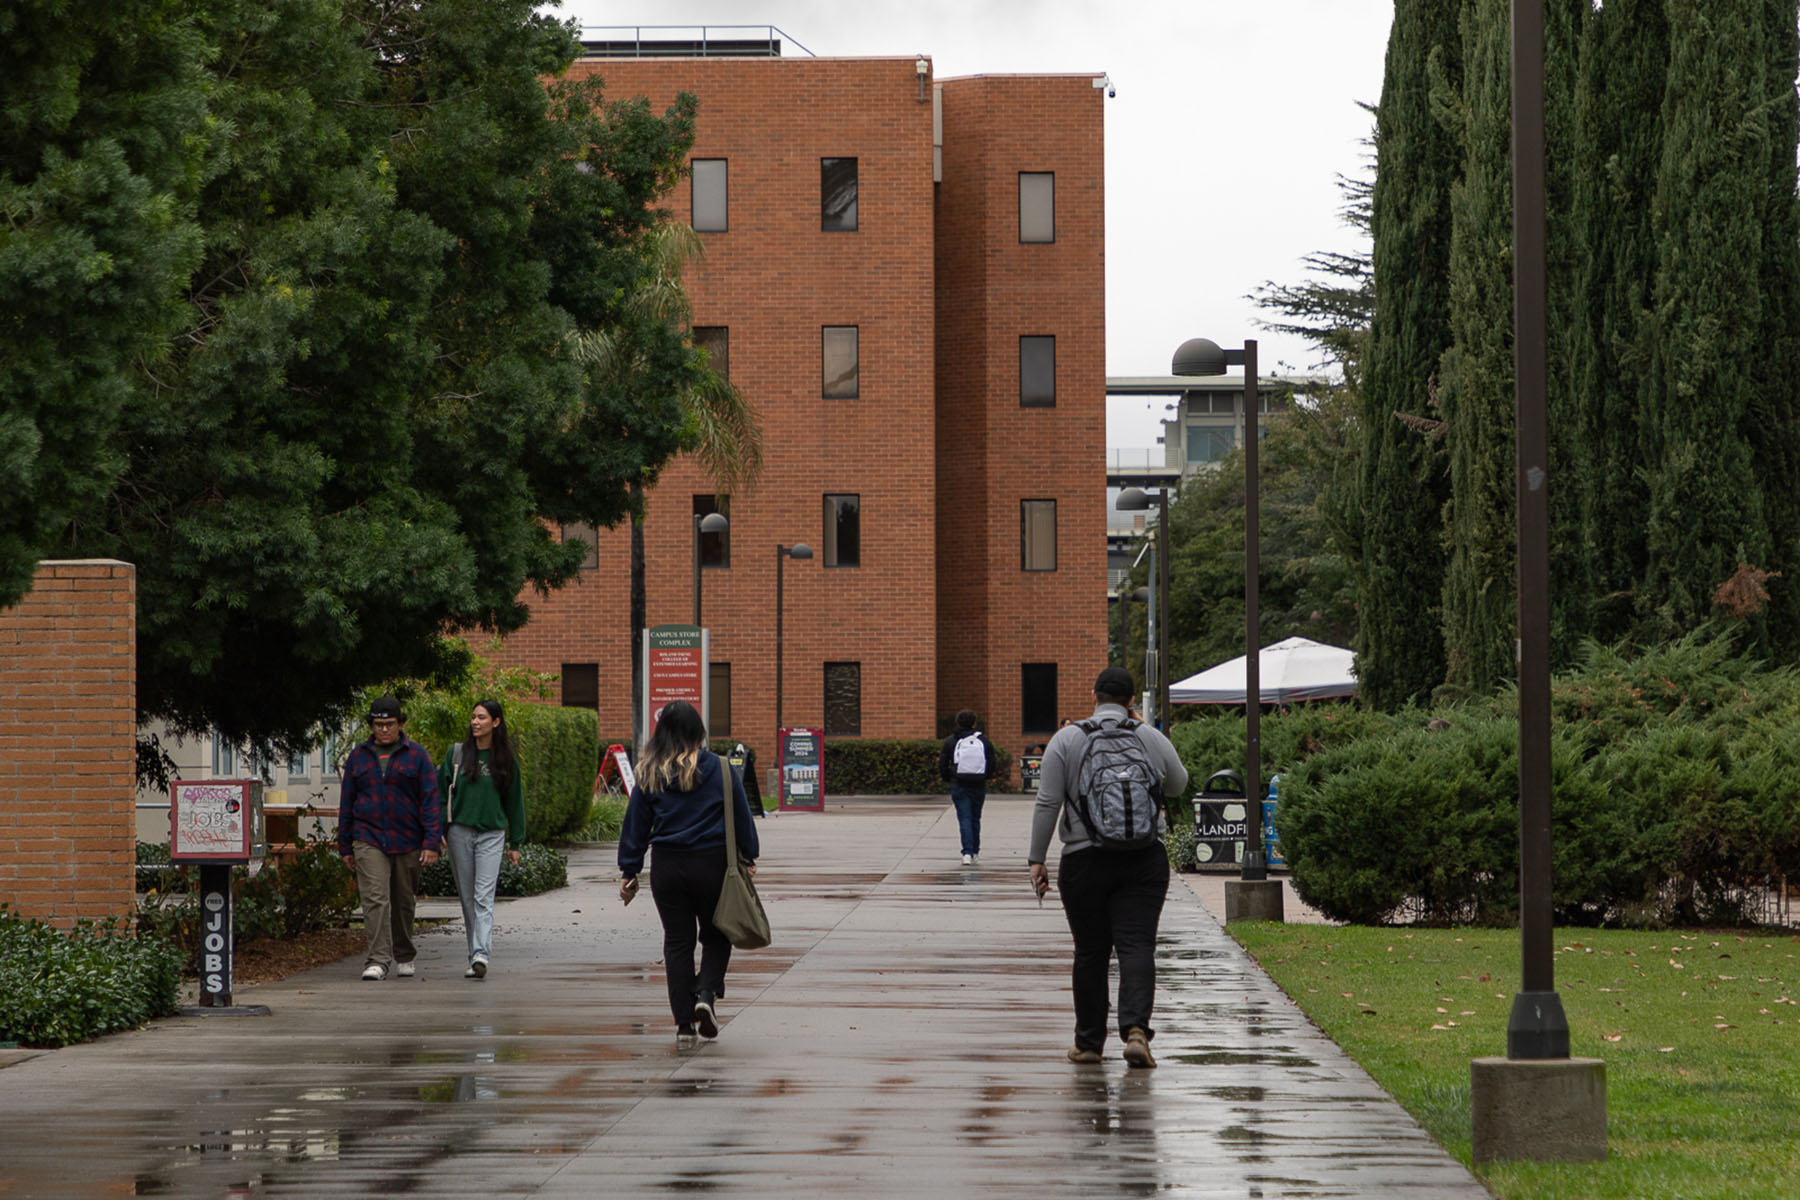 Students walk atop a wet concrete passage way on a campus with brick buildings.